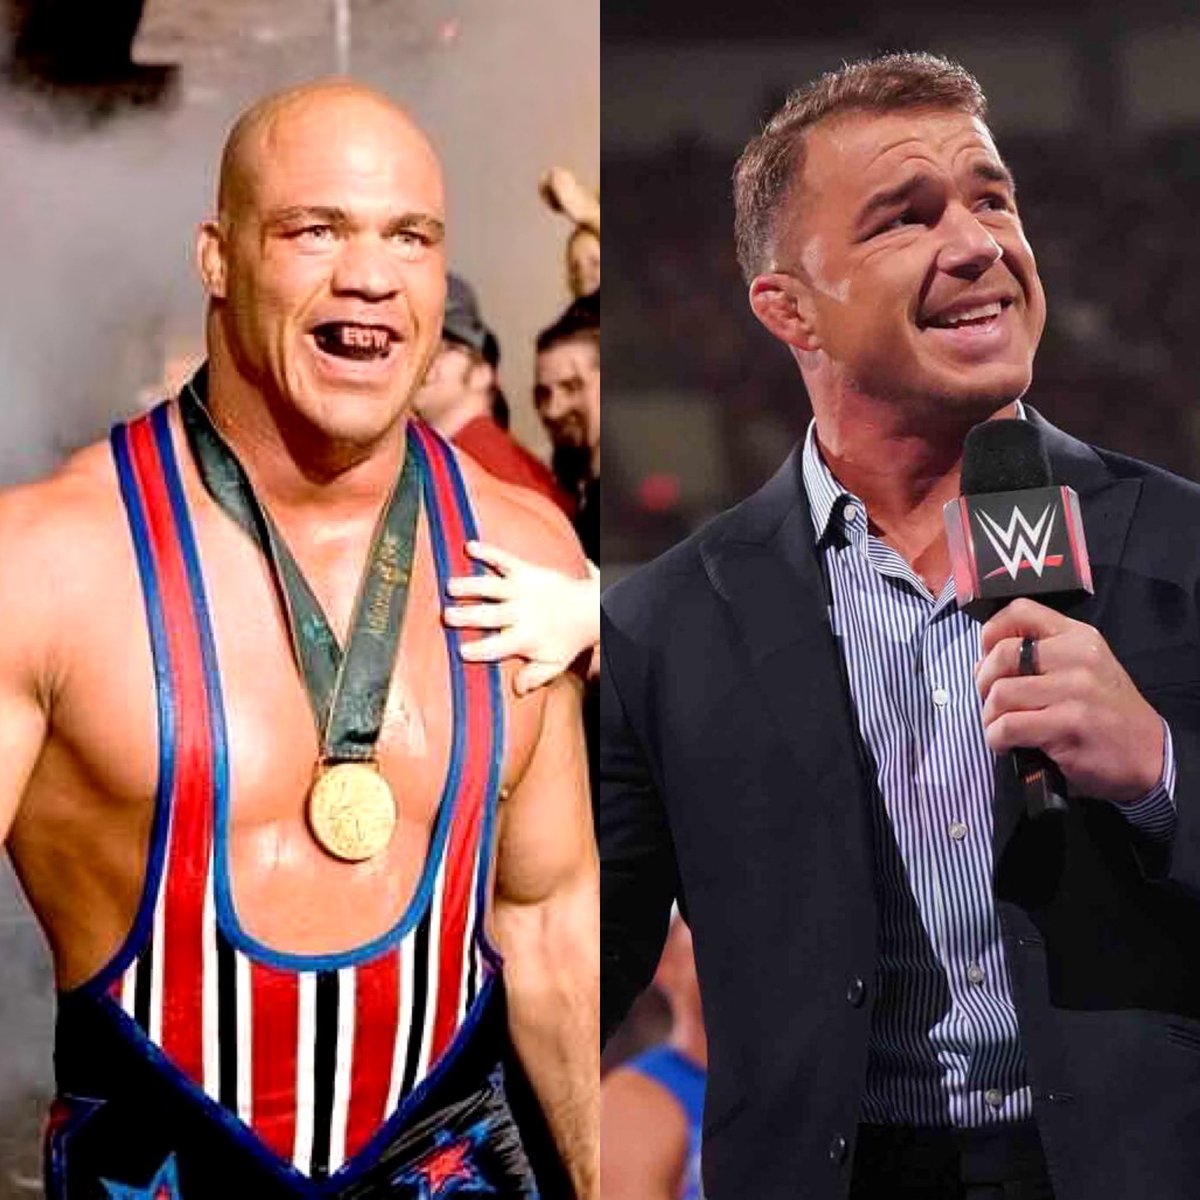 Kurt Angle thinks it would be a great idea for him to be a heel manager for a currently heel Chad Gable & is open to returning for the idea as long as it’s worth it to him. (The Kurt Angle Show Pod)